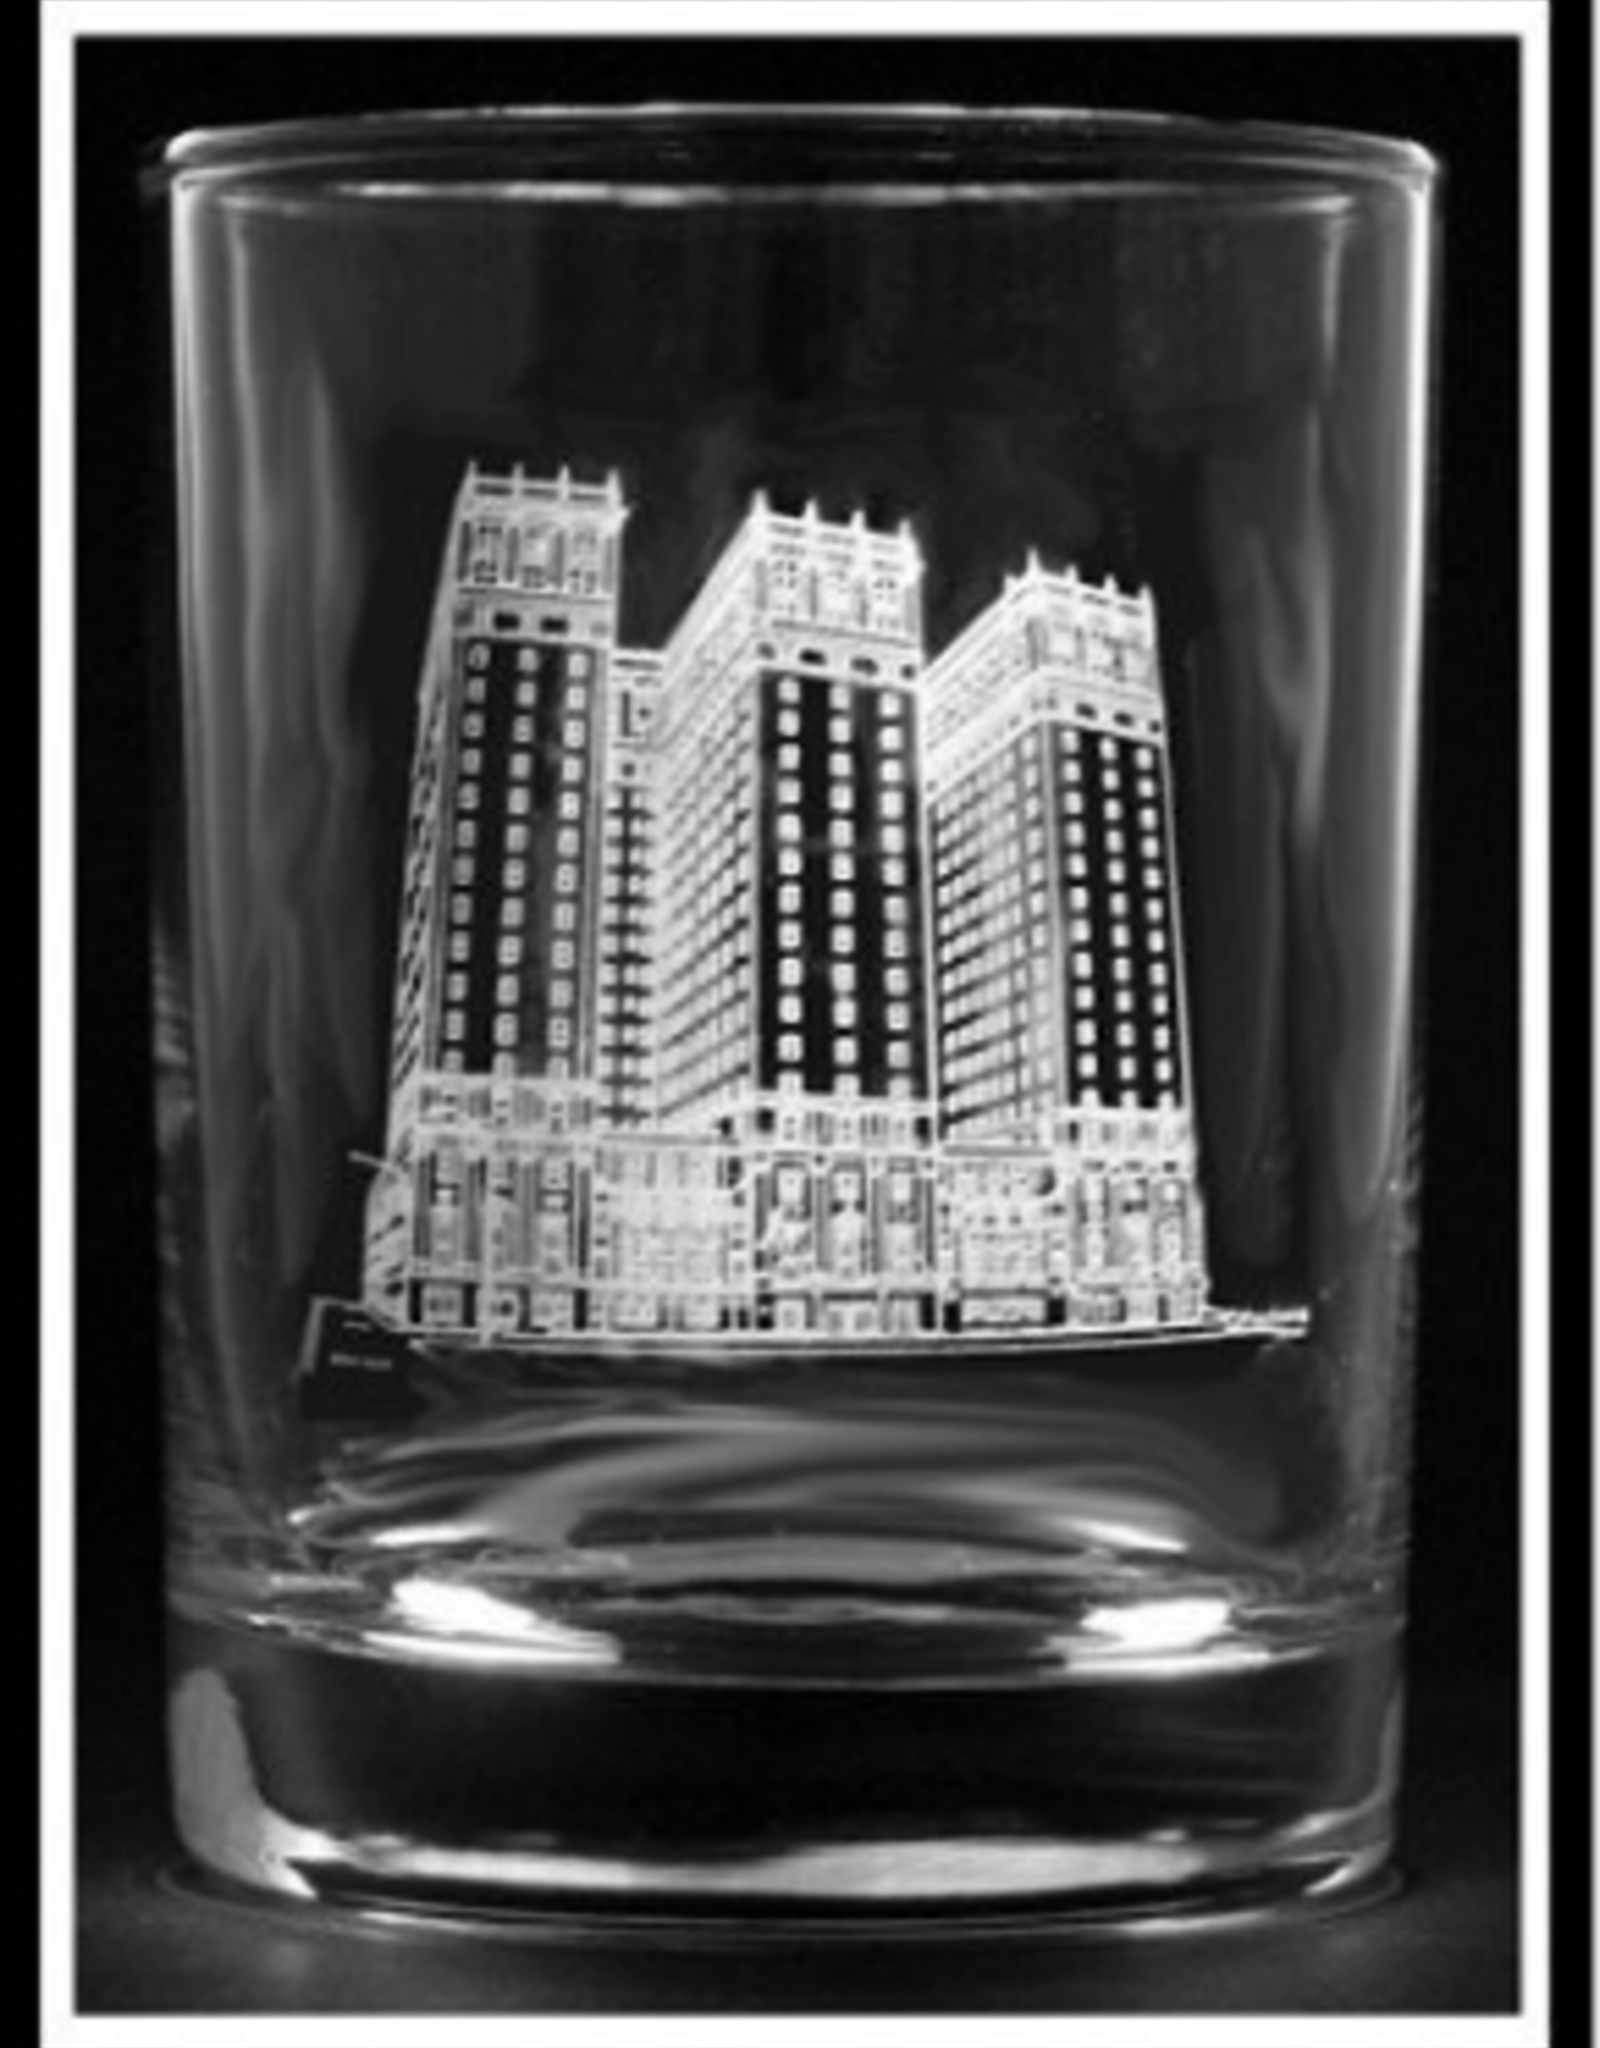 STATLER TOWERS ROCK GLASS